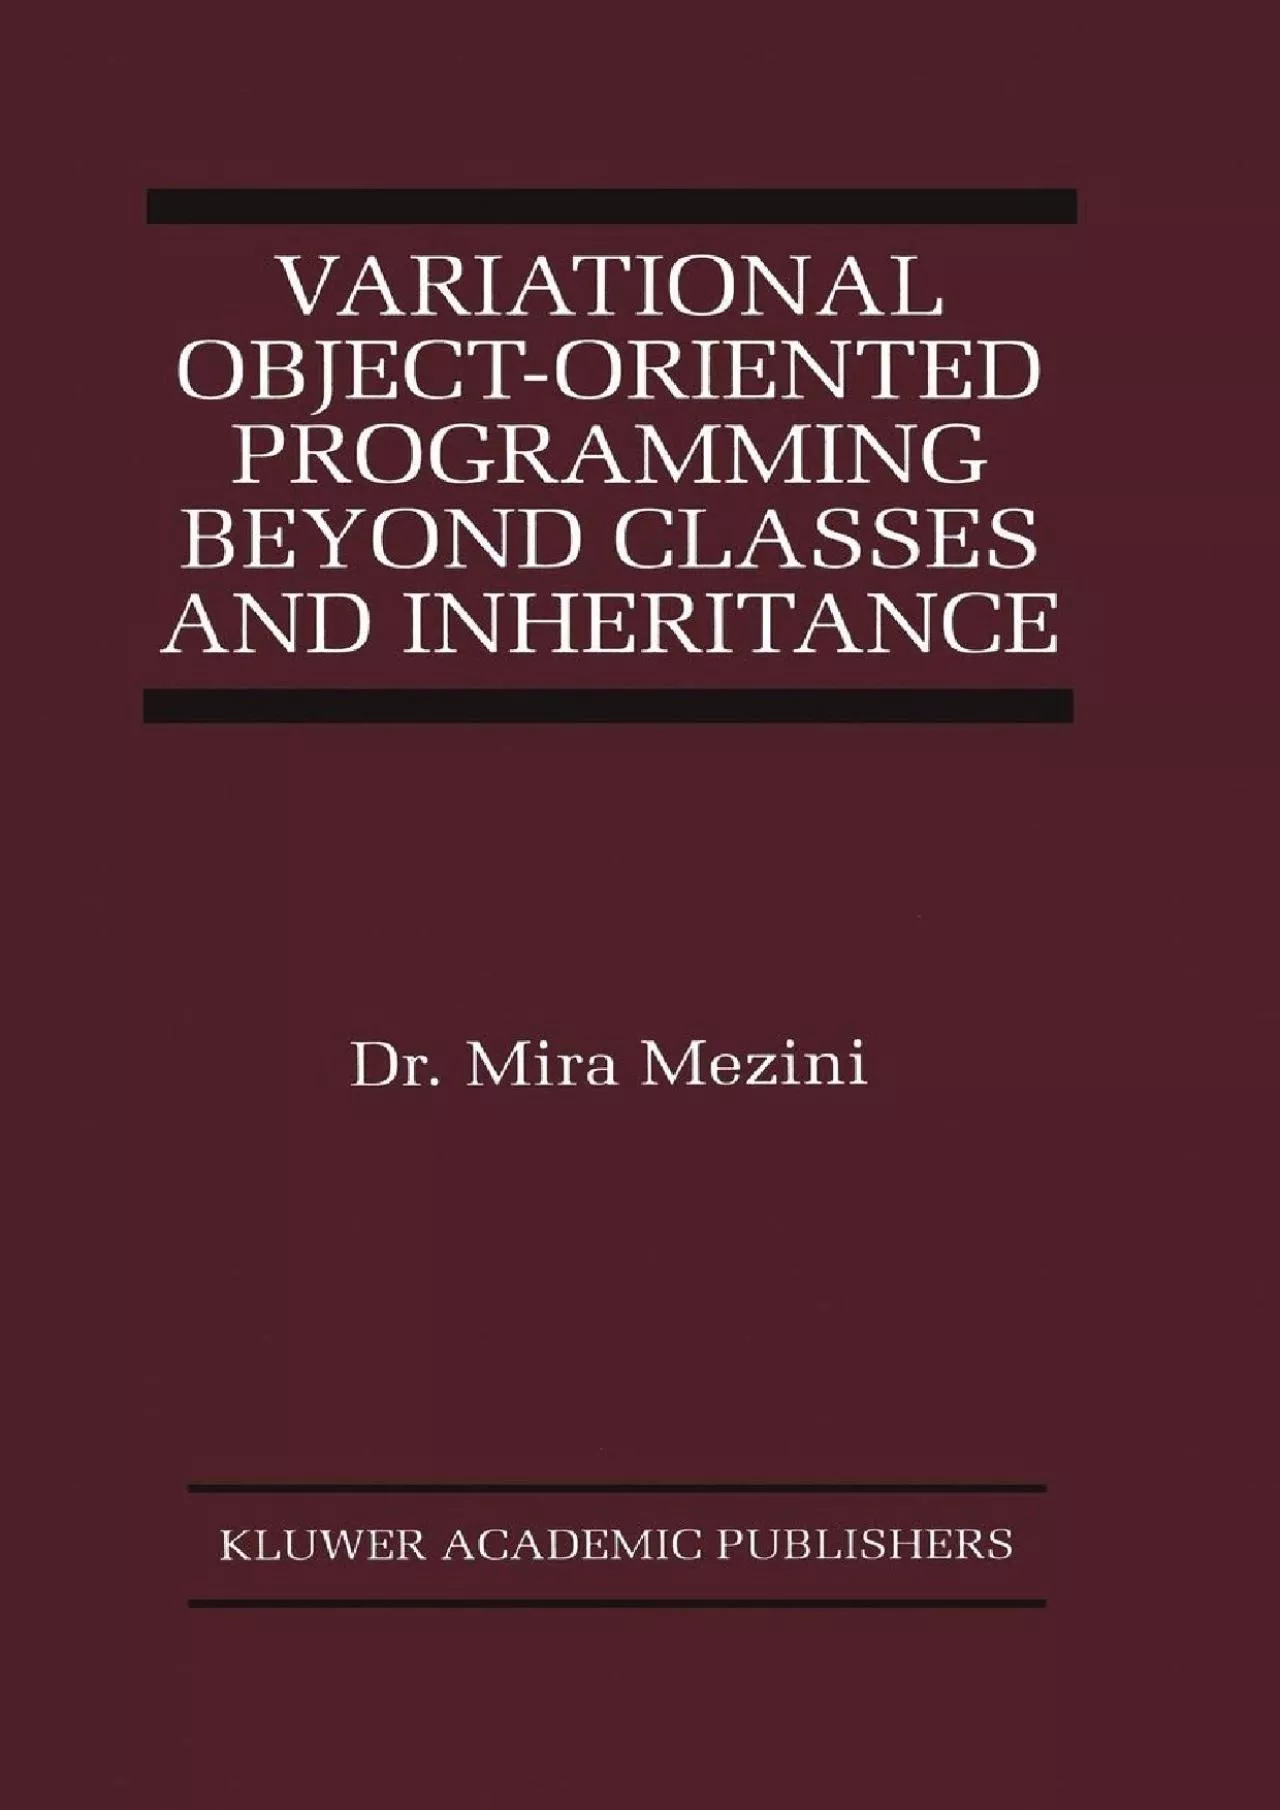 [BEST]-Variational Object-Oriented Programming Beyond Classes and Inheritance (The Springer